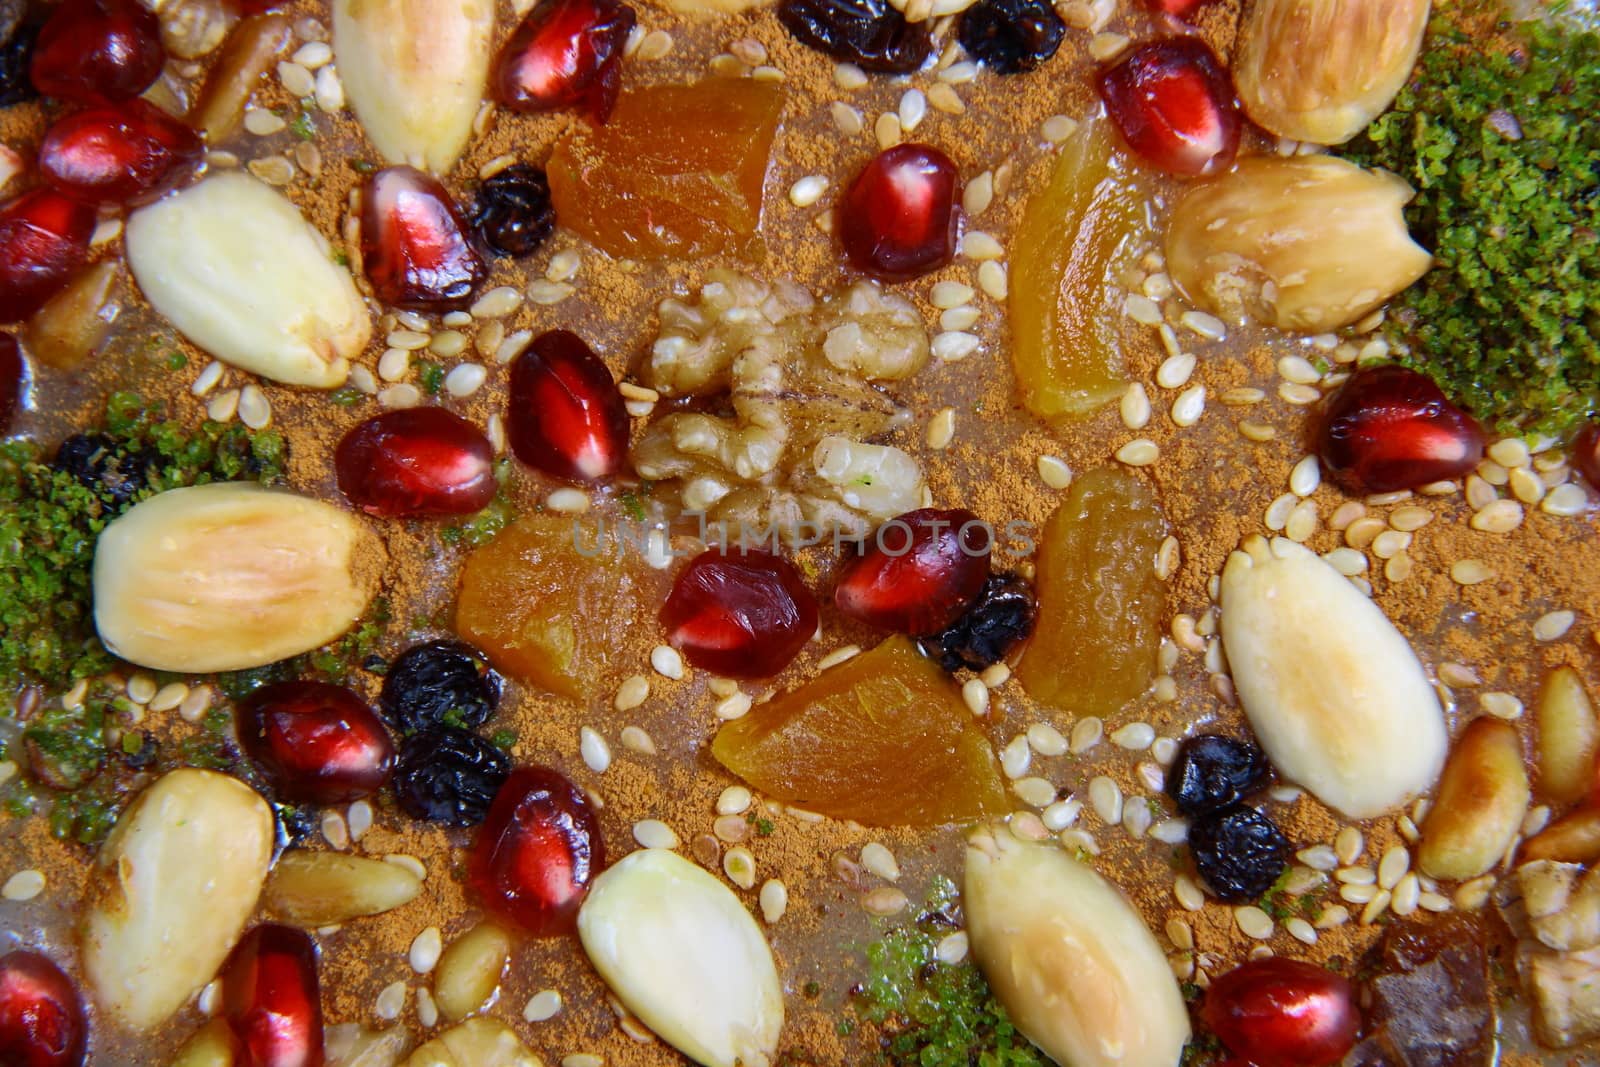 delicious noah's pudding with lots of nuts in it 